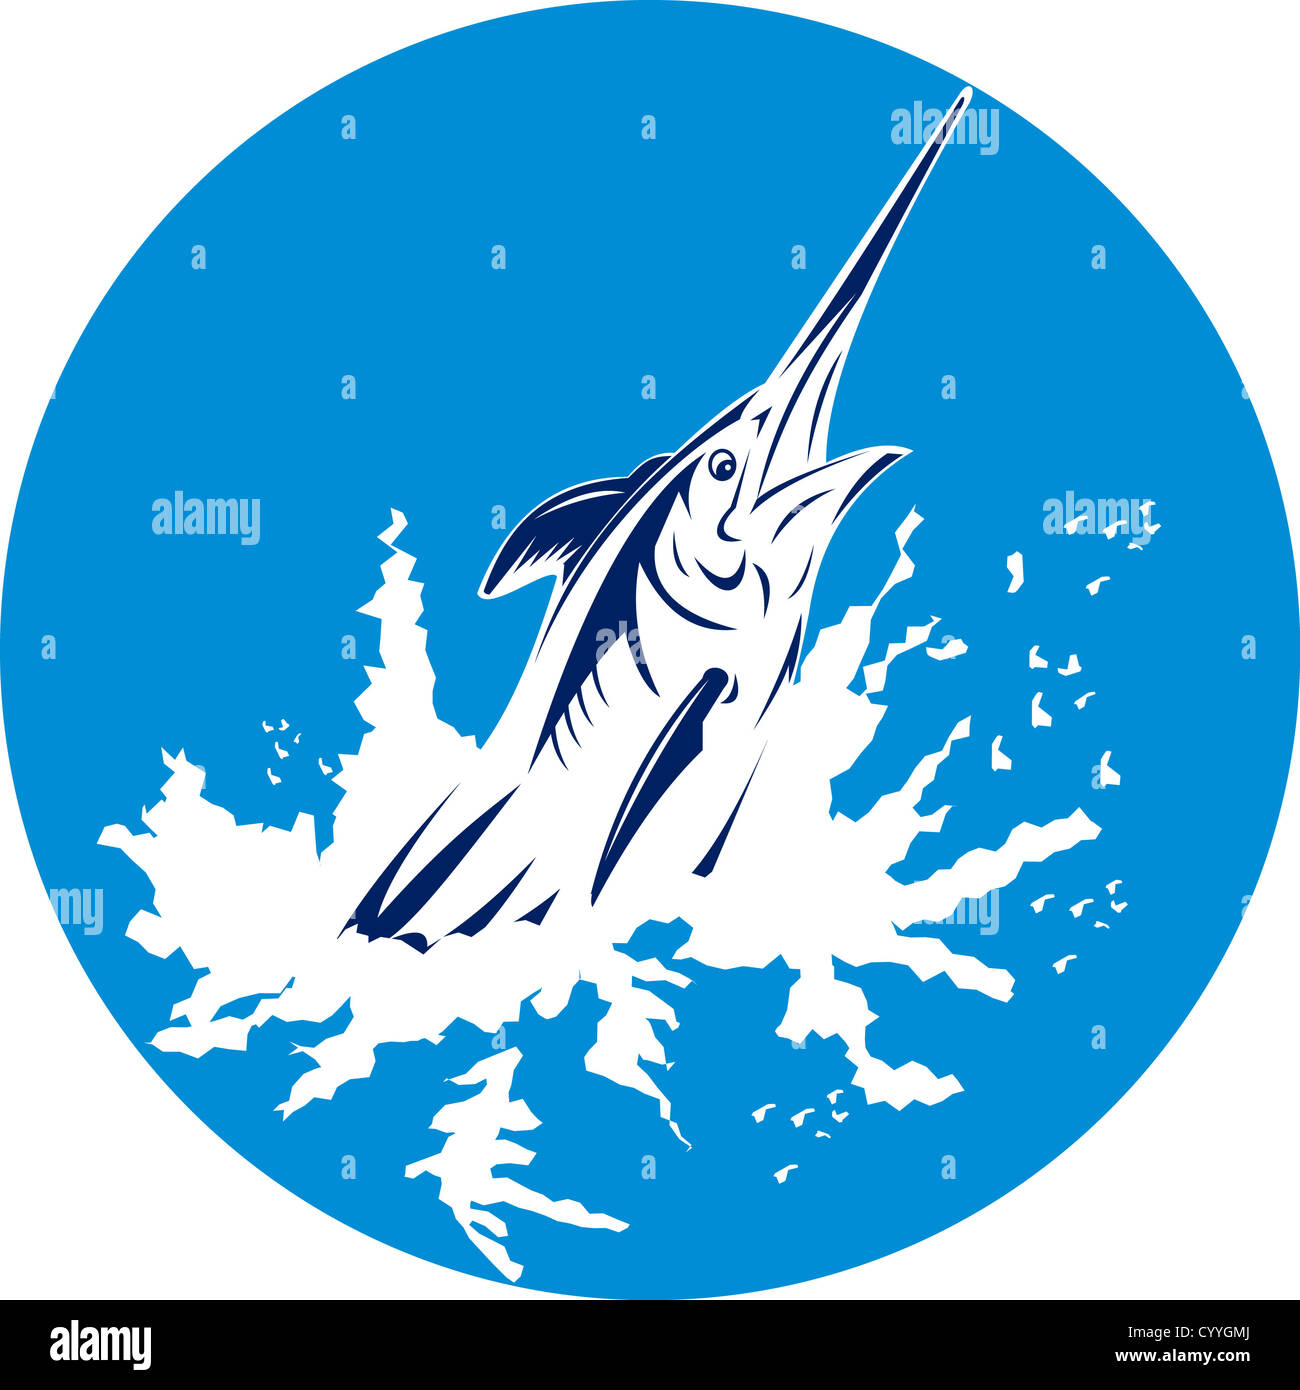 Illustration of a blue marlin swordfish jumping viewed from side done in retro woodcut style. Stock Photo